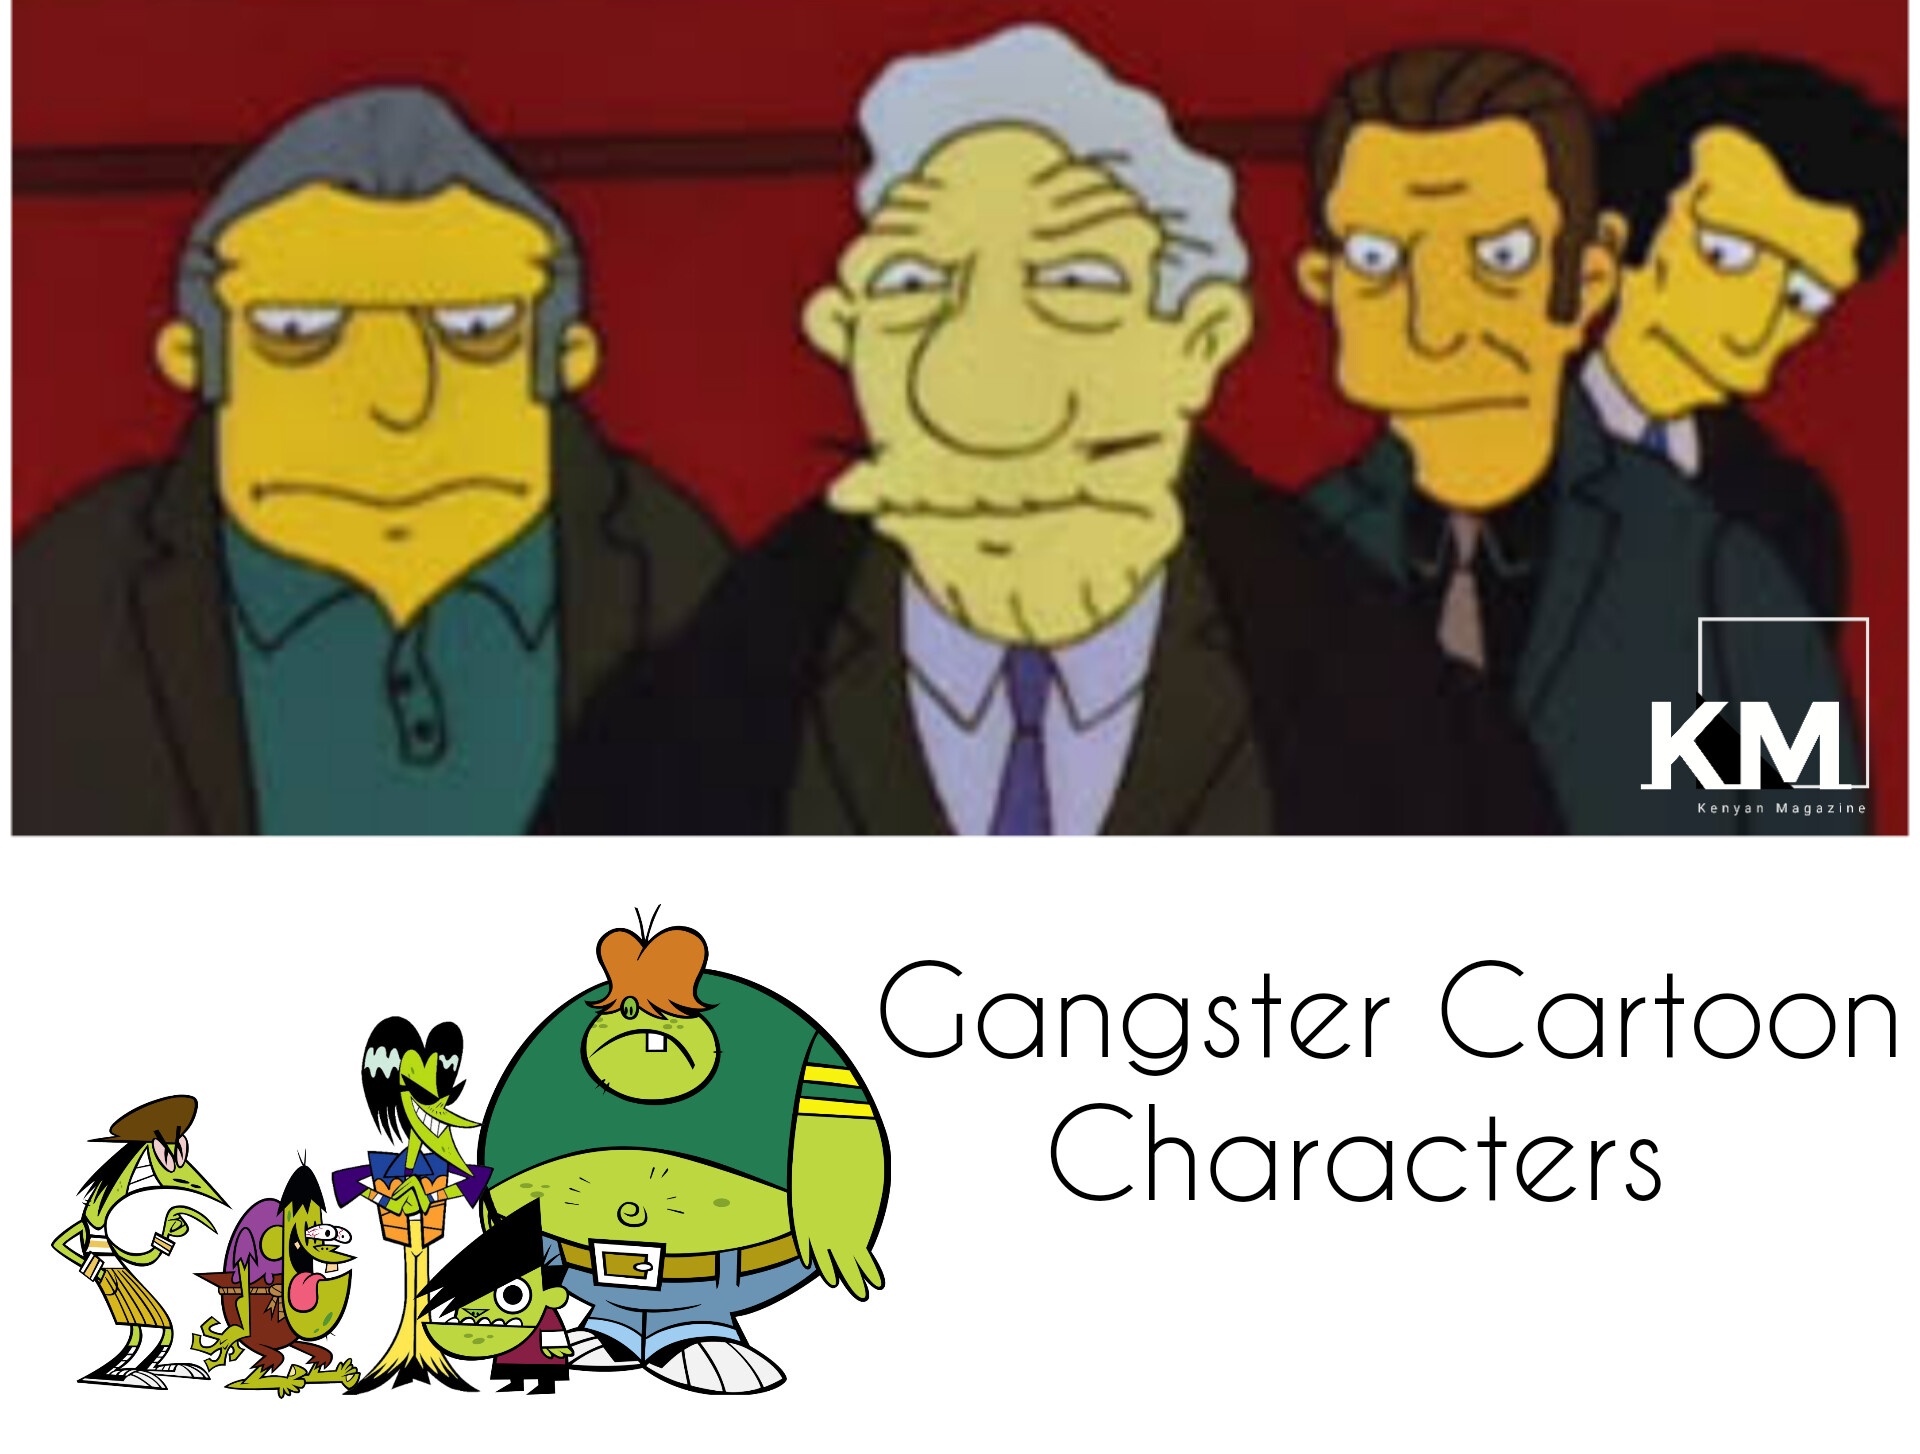 Gangster Cartoon characters